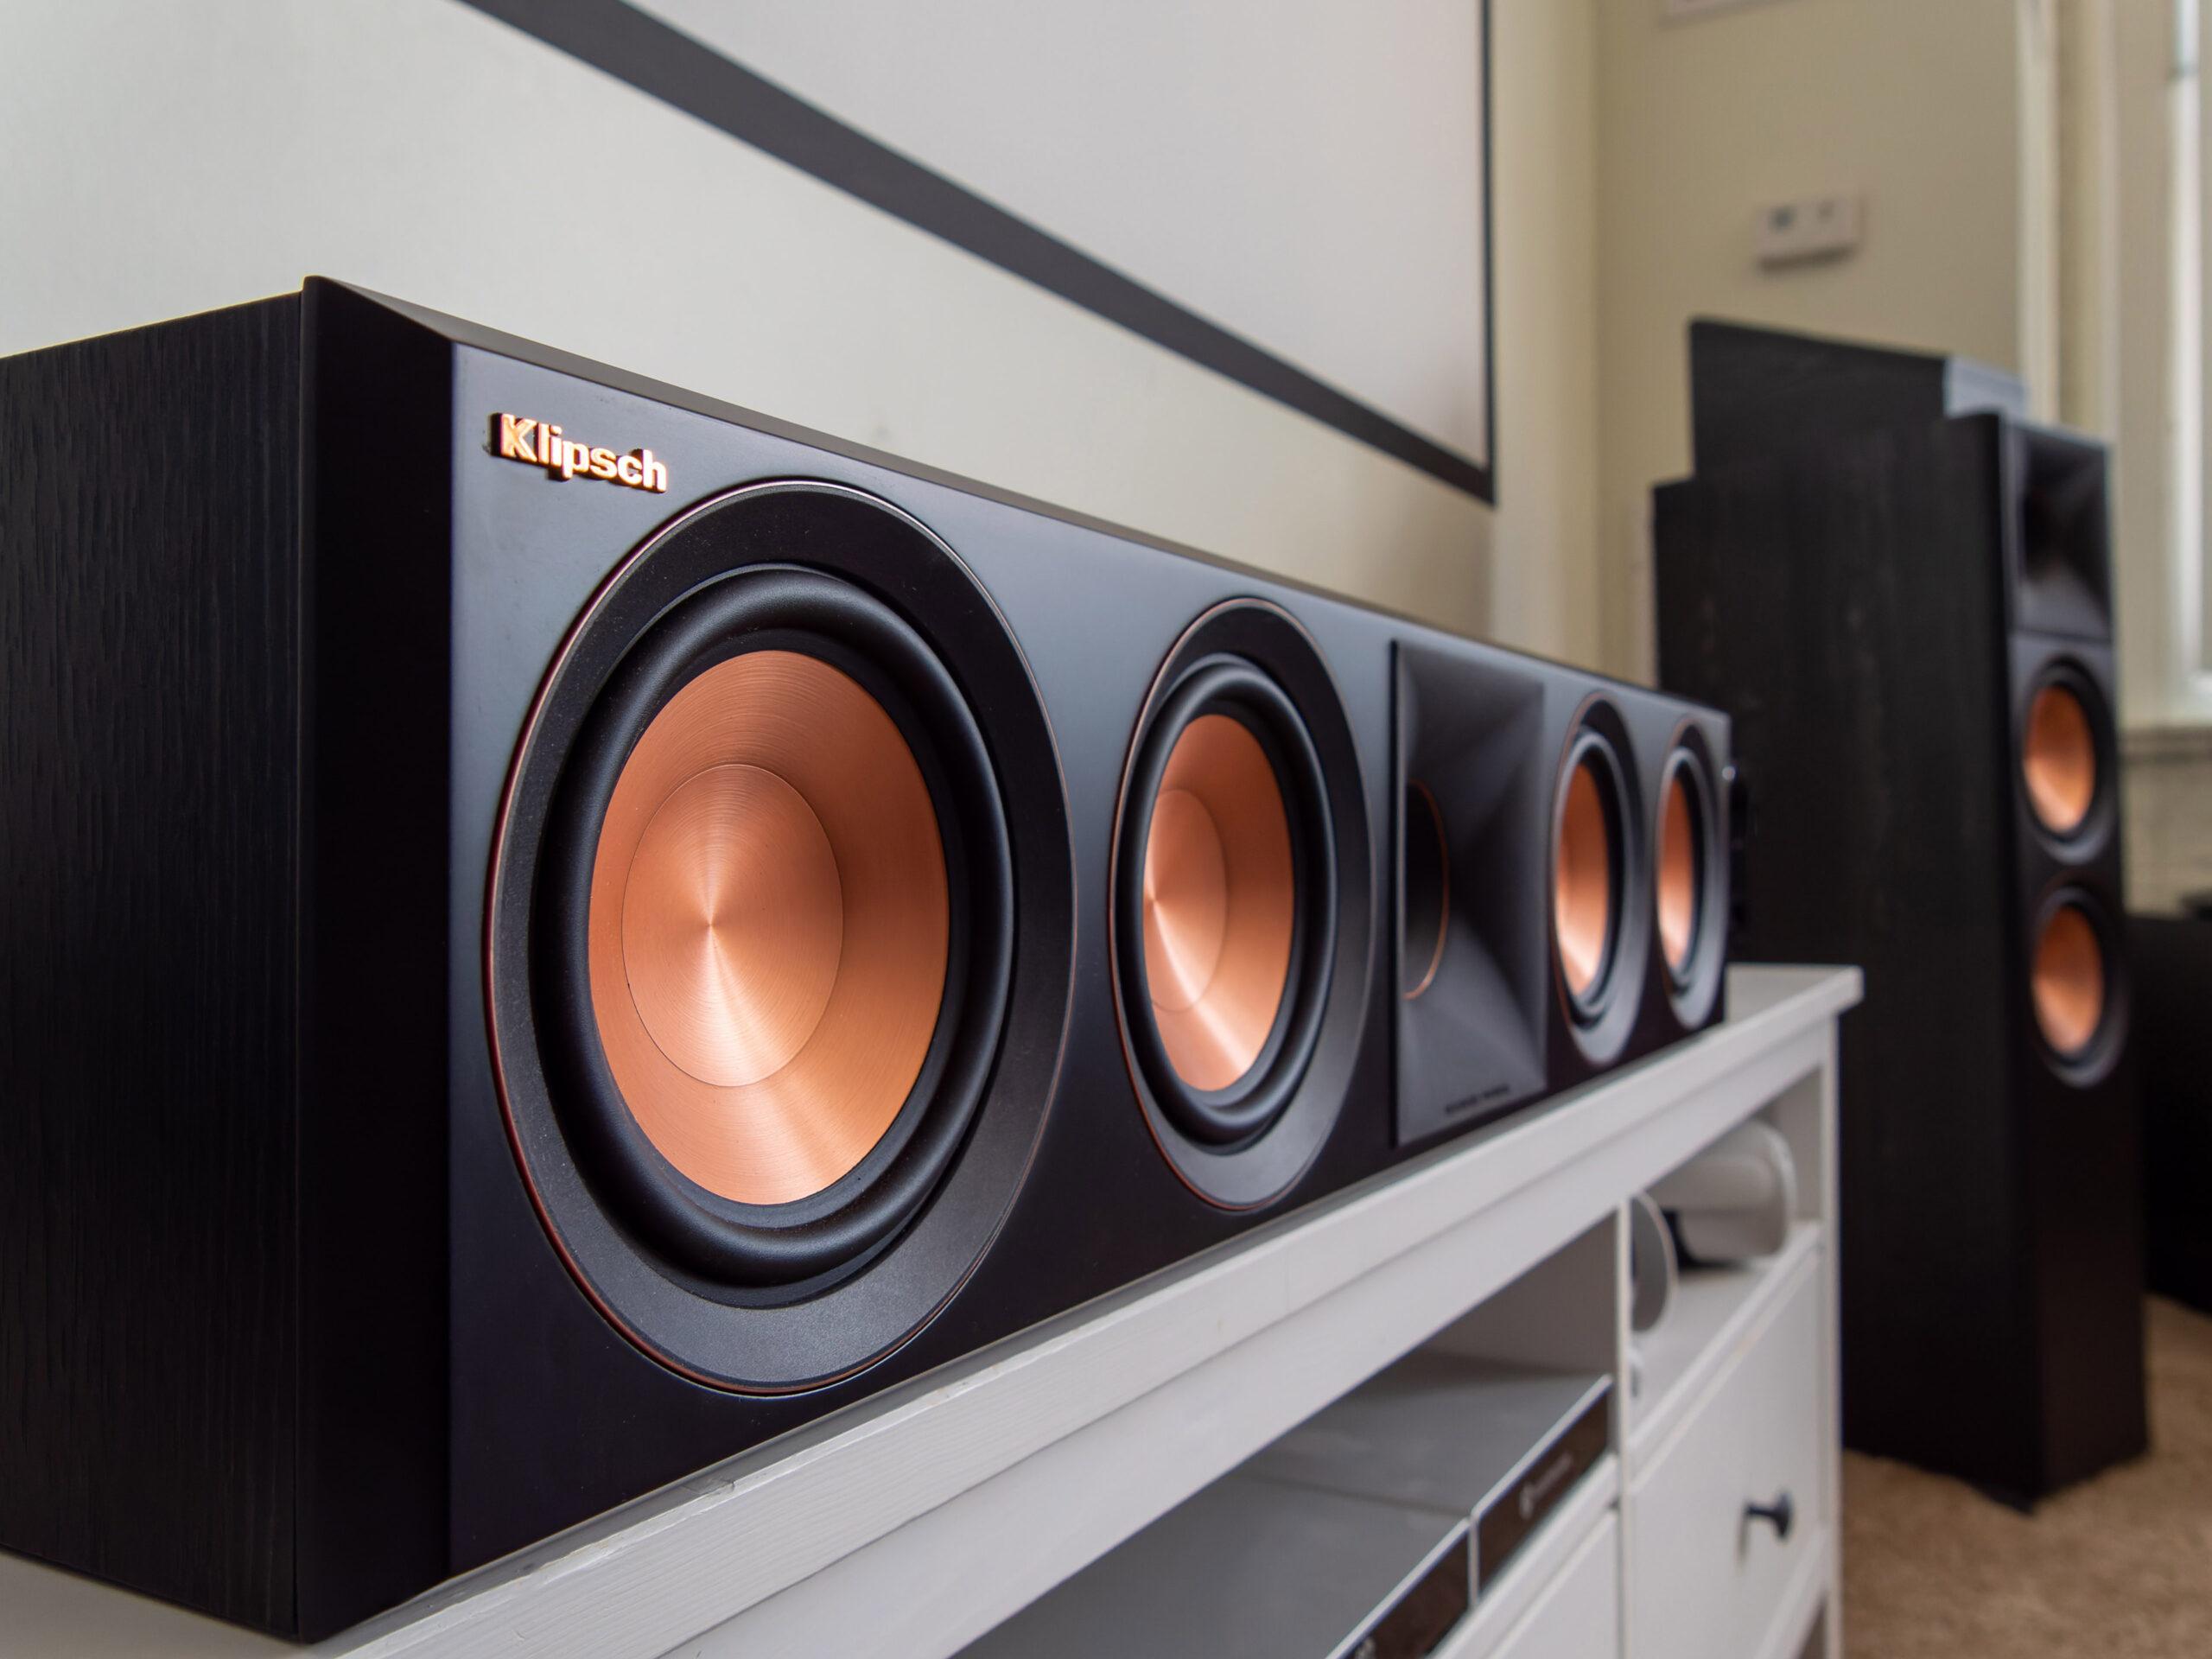 Klipsch RP-5000F Review: Klipsch Delivers Another Classic